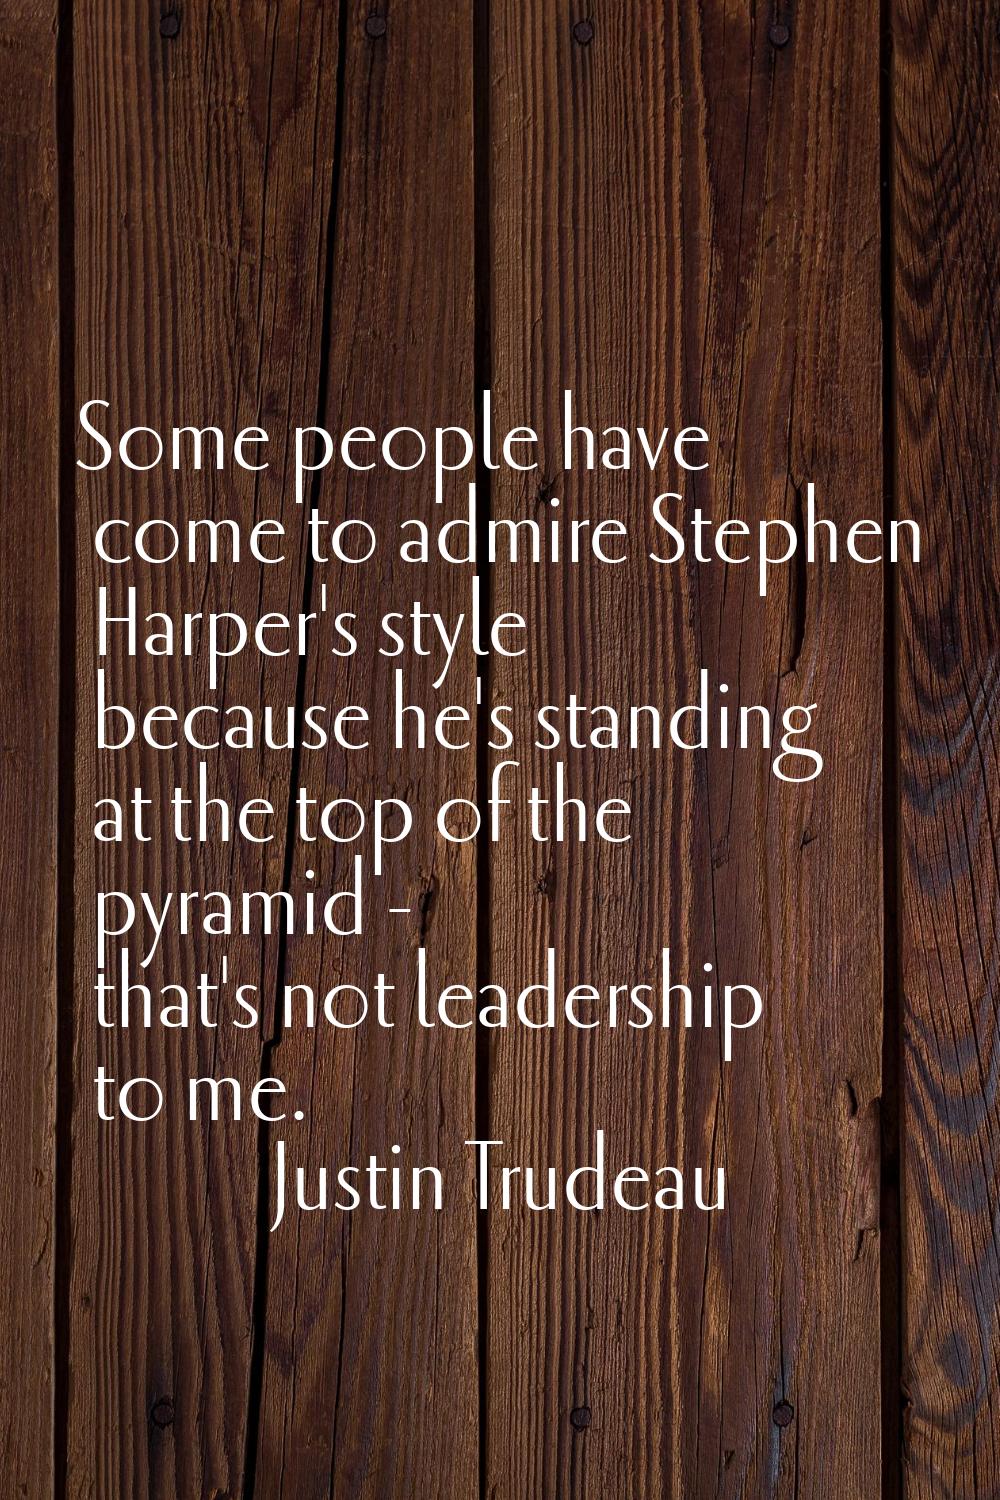 Some people have come to admire Stephen Harper's style because he's standing at the top of the pyra